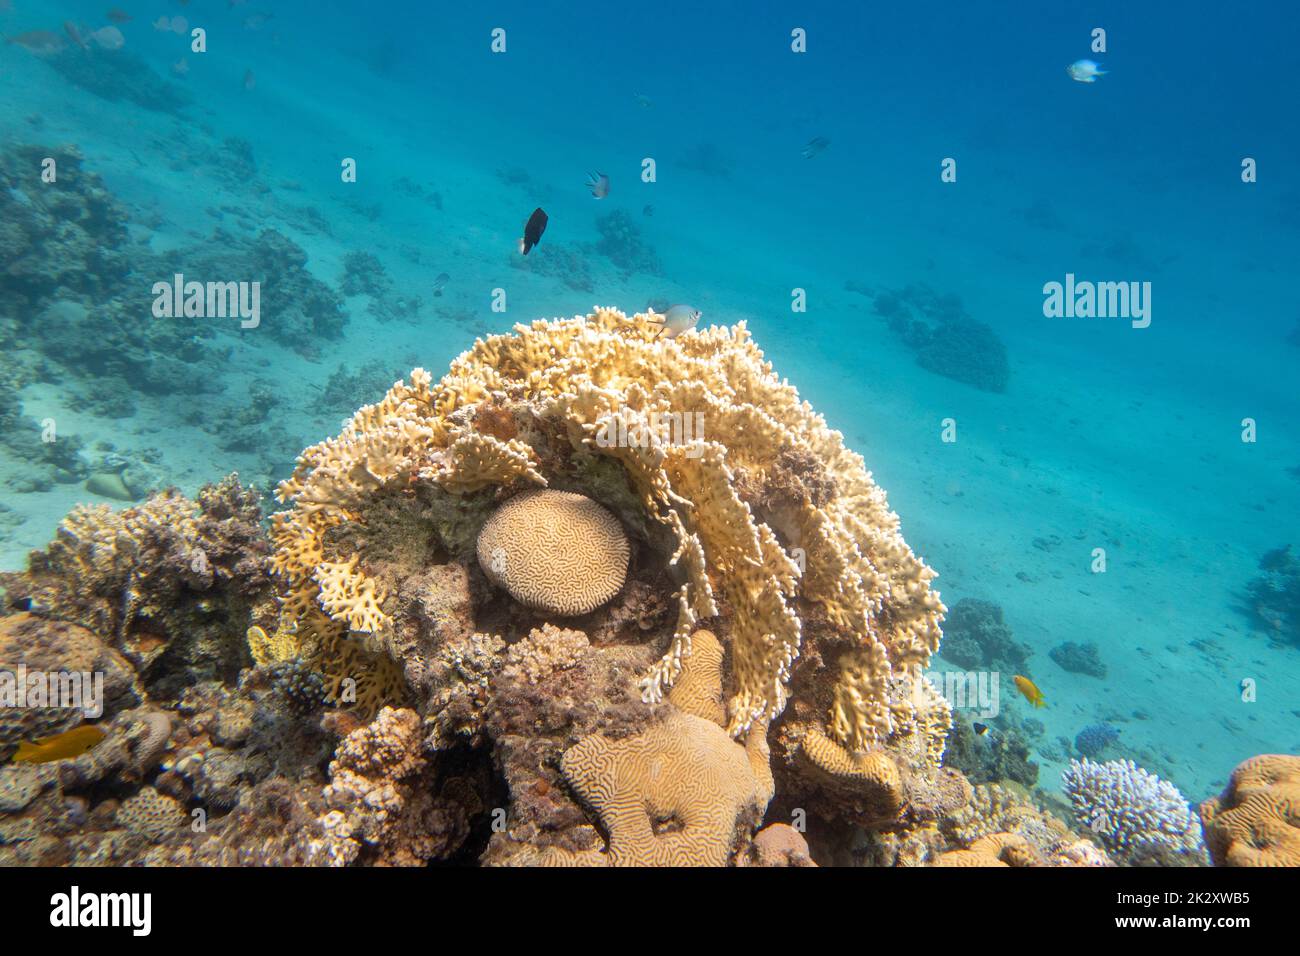 Colorful, picturesque coral reef at the bottom of tropical sea, fire and brain corals, underwater landscape Stock Photo